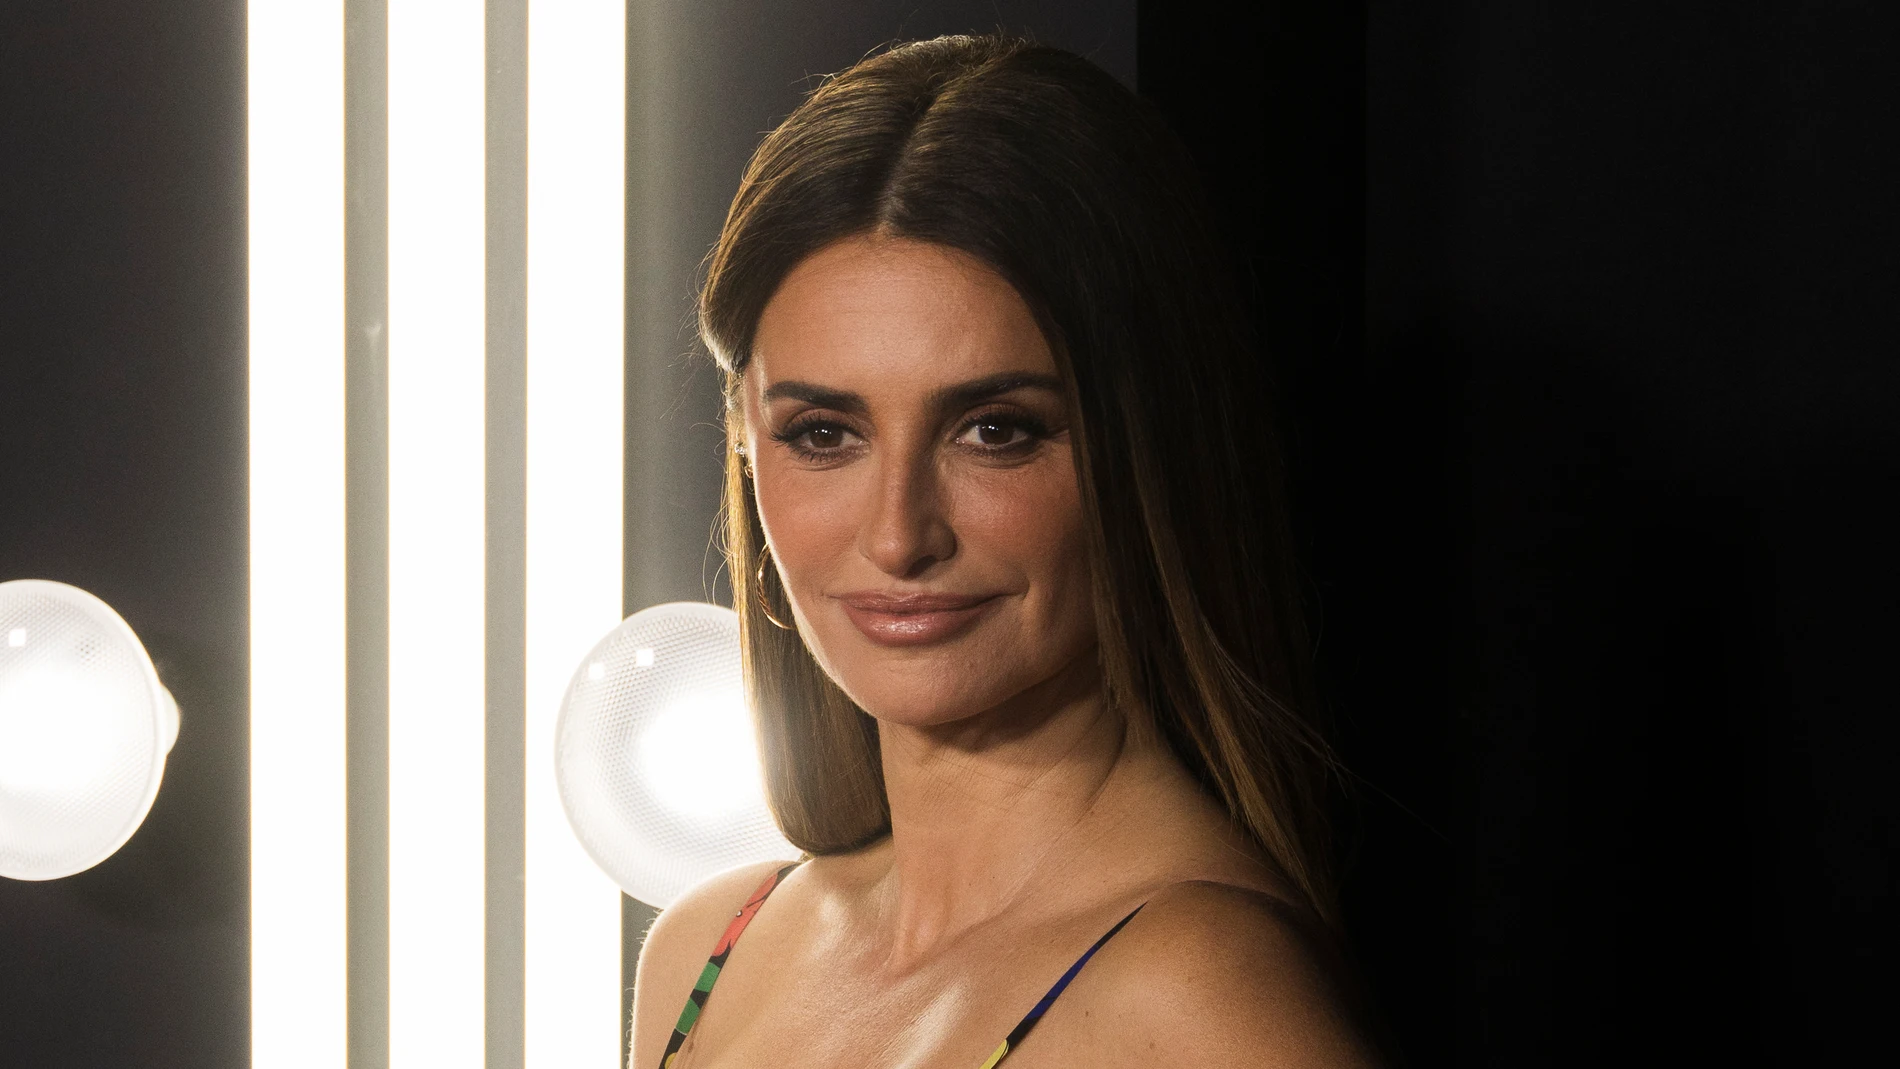 Penelope Cruz arrives at the premiere of "Ferrari" on Tuesday, Dec. 12, 2023, at the Director's Guild of America in Los Angeles. (Photo by Willy Sanjuan/Invision/AP)